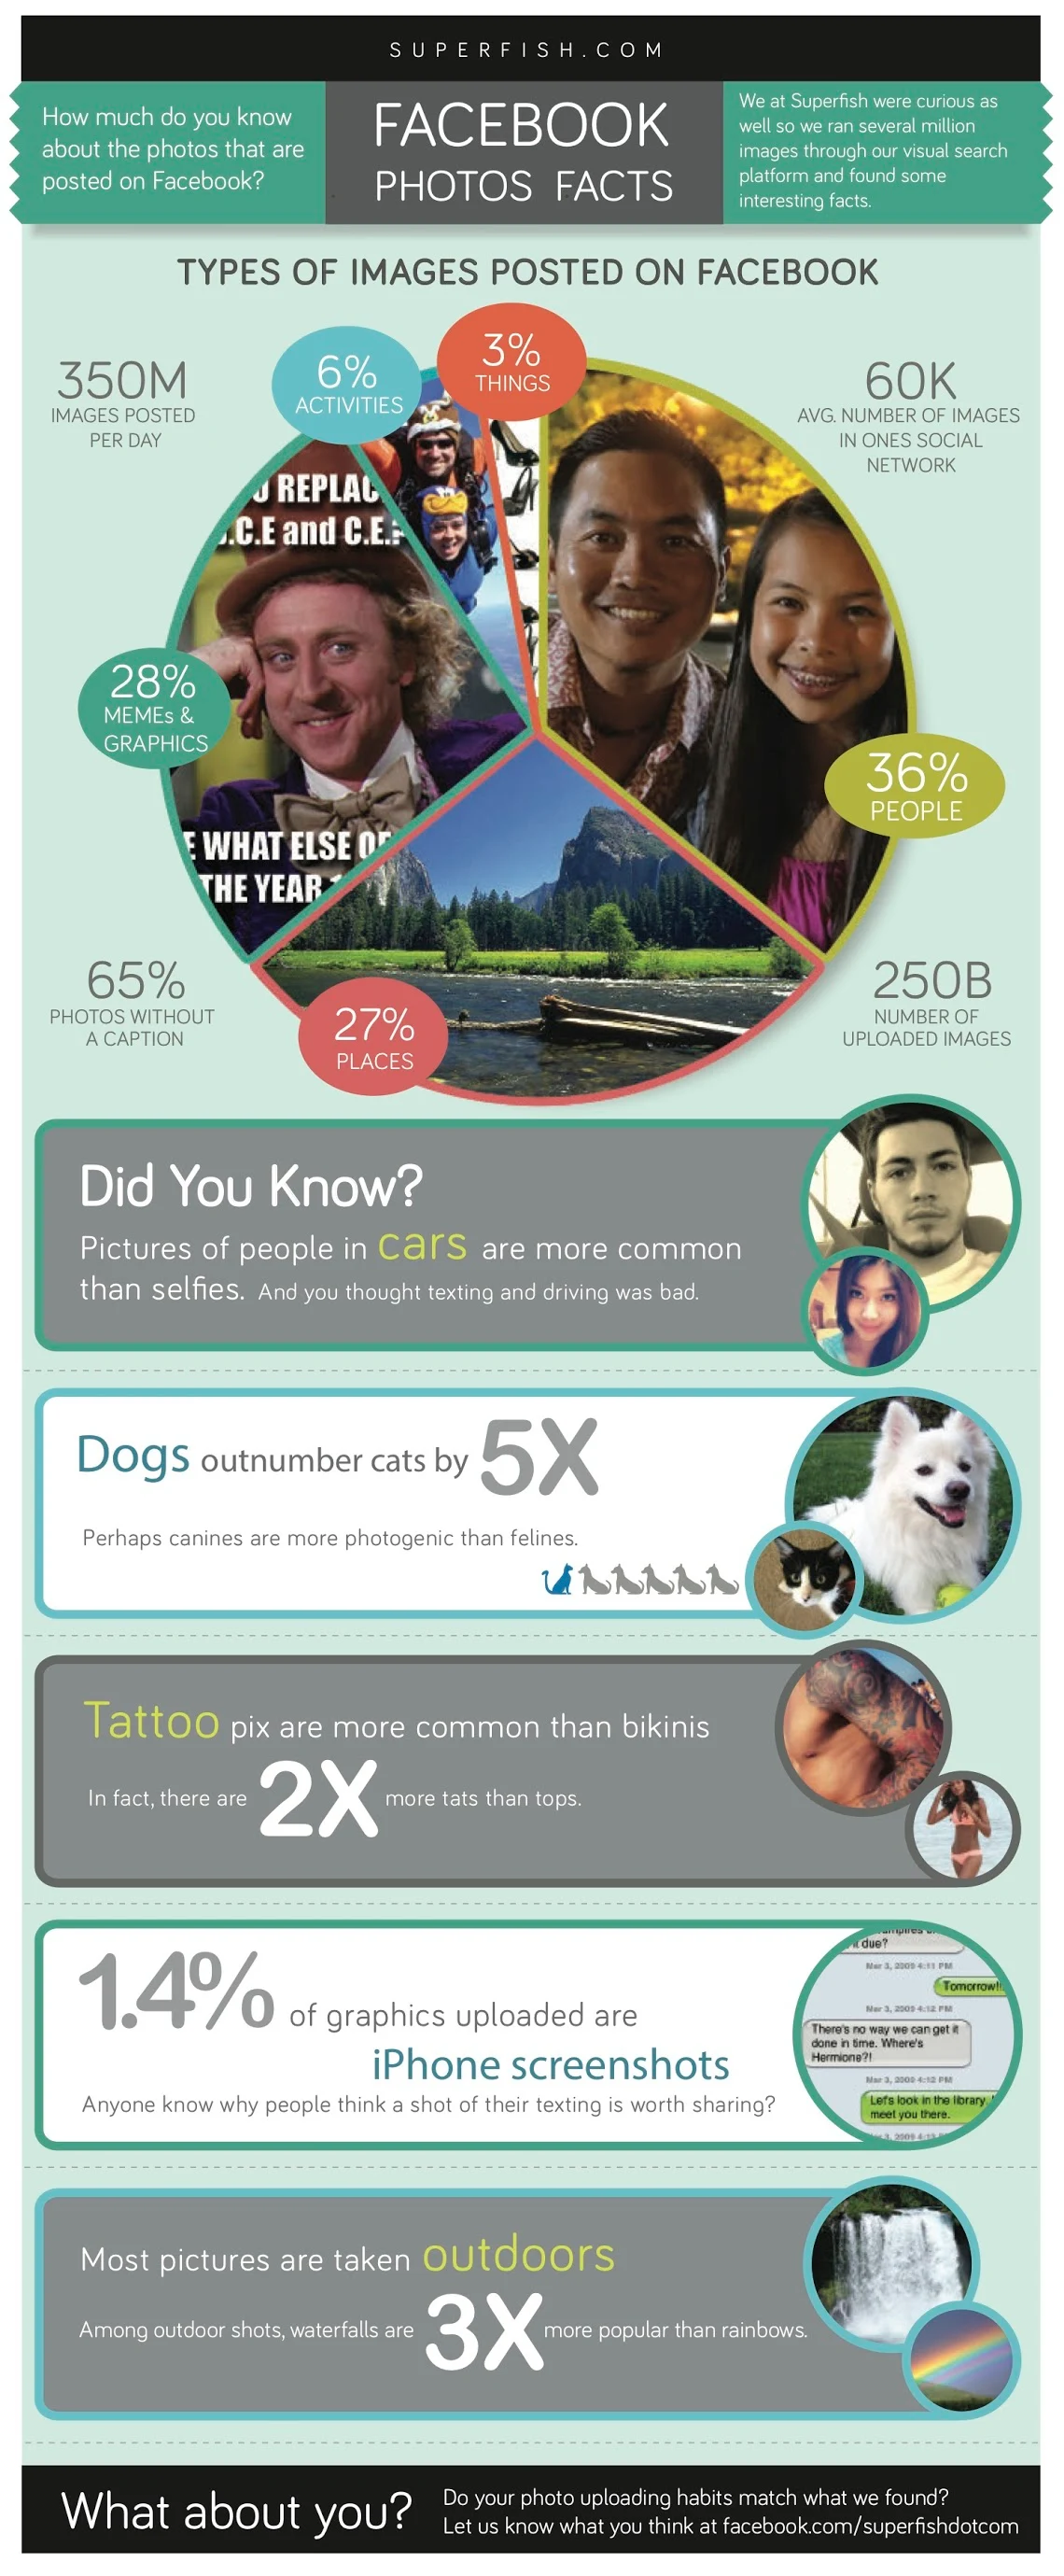 10+ Facebook Photo Facts [INFOGRAPHIC]